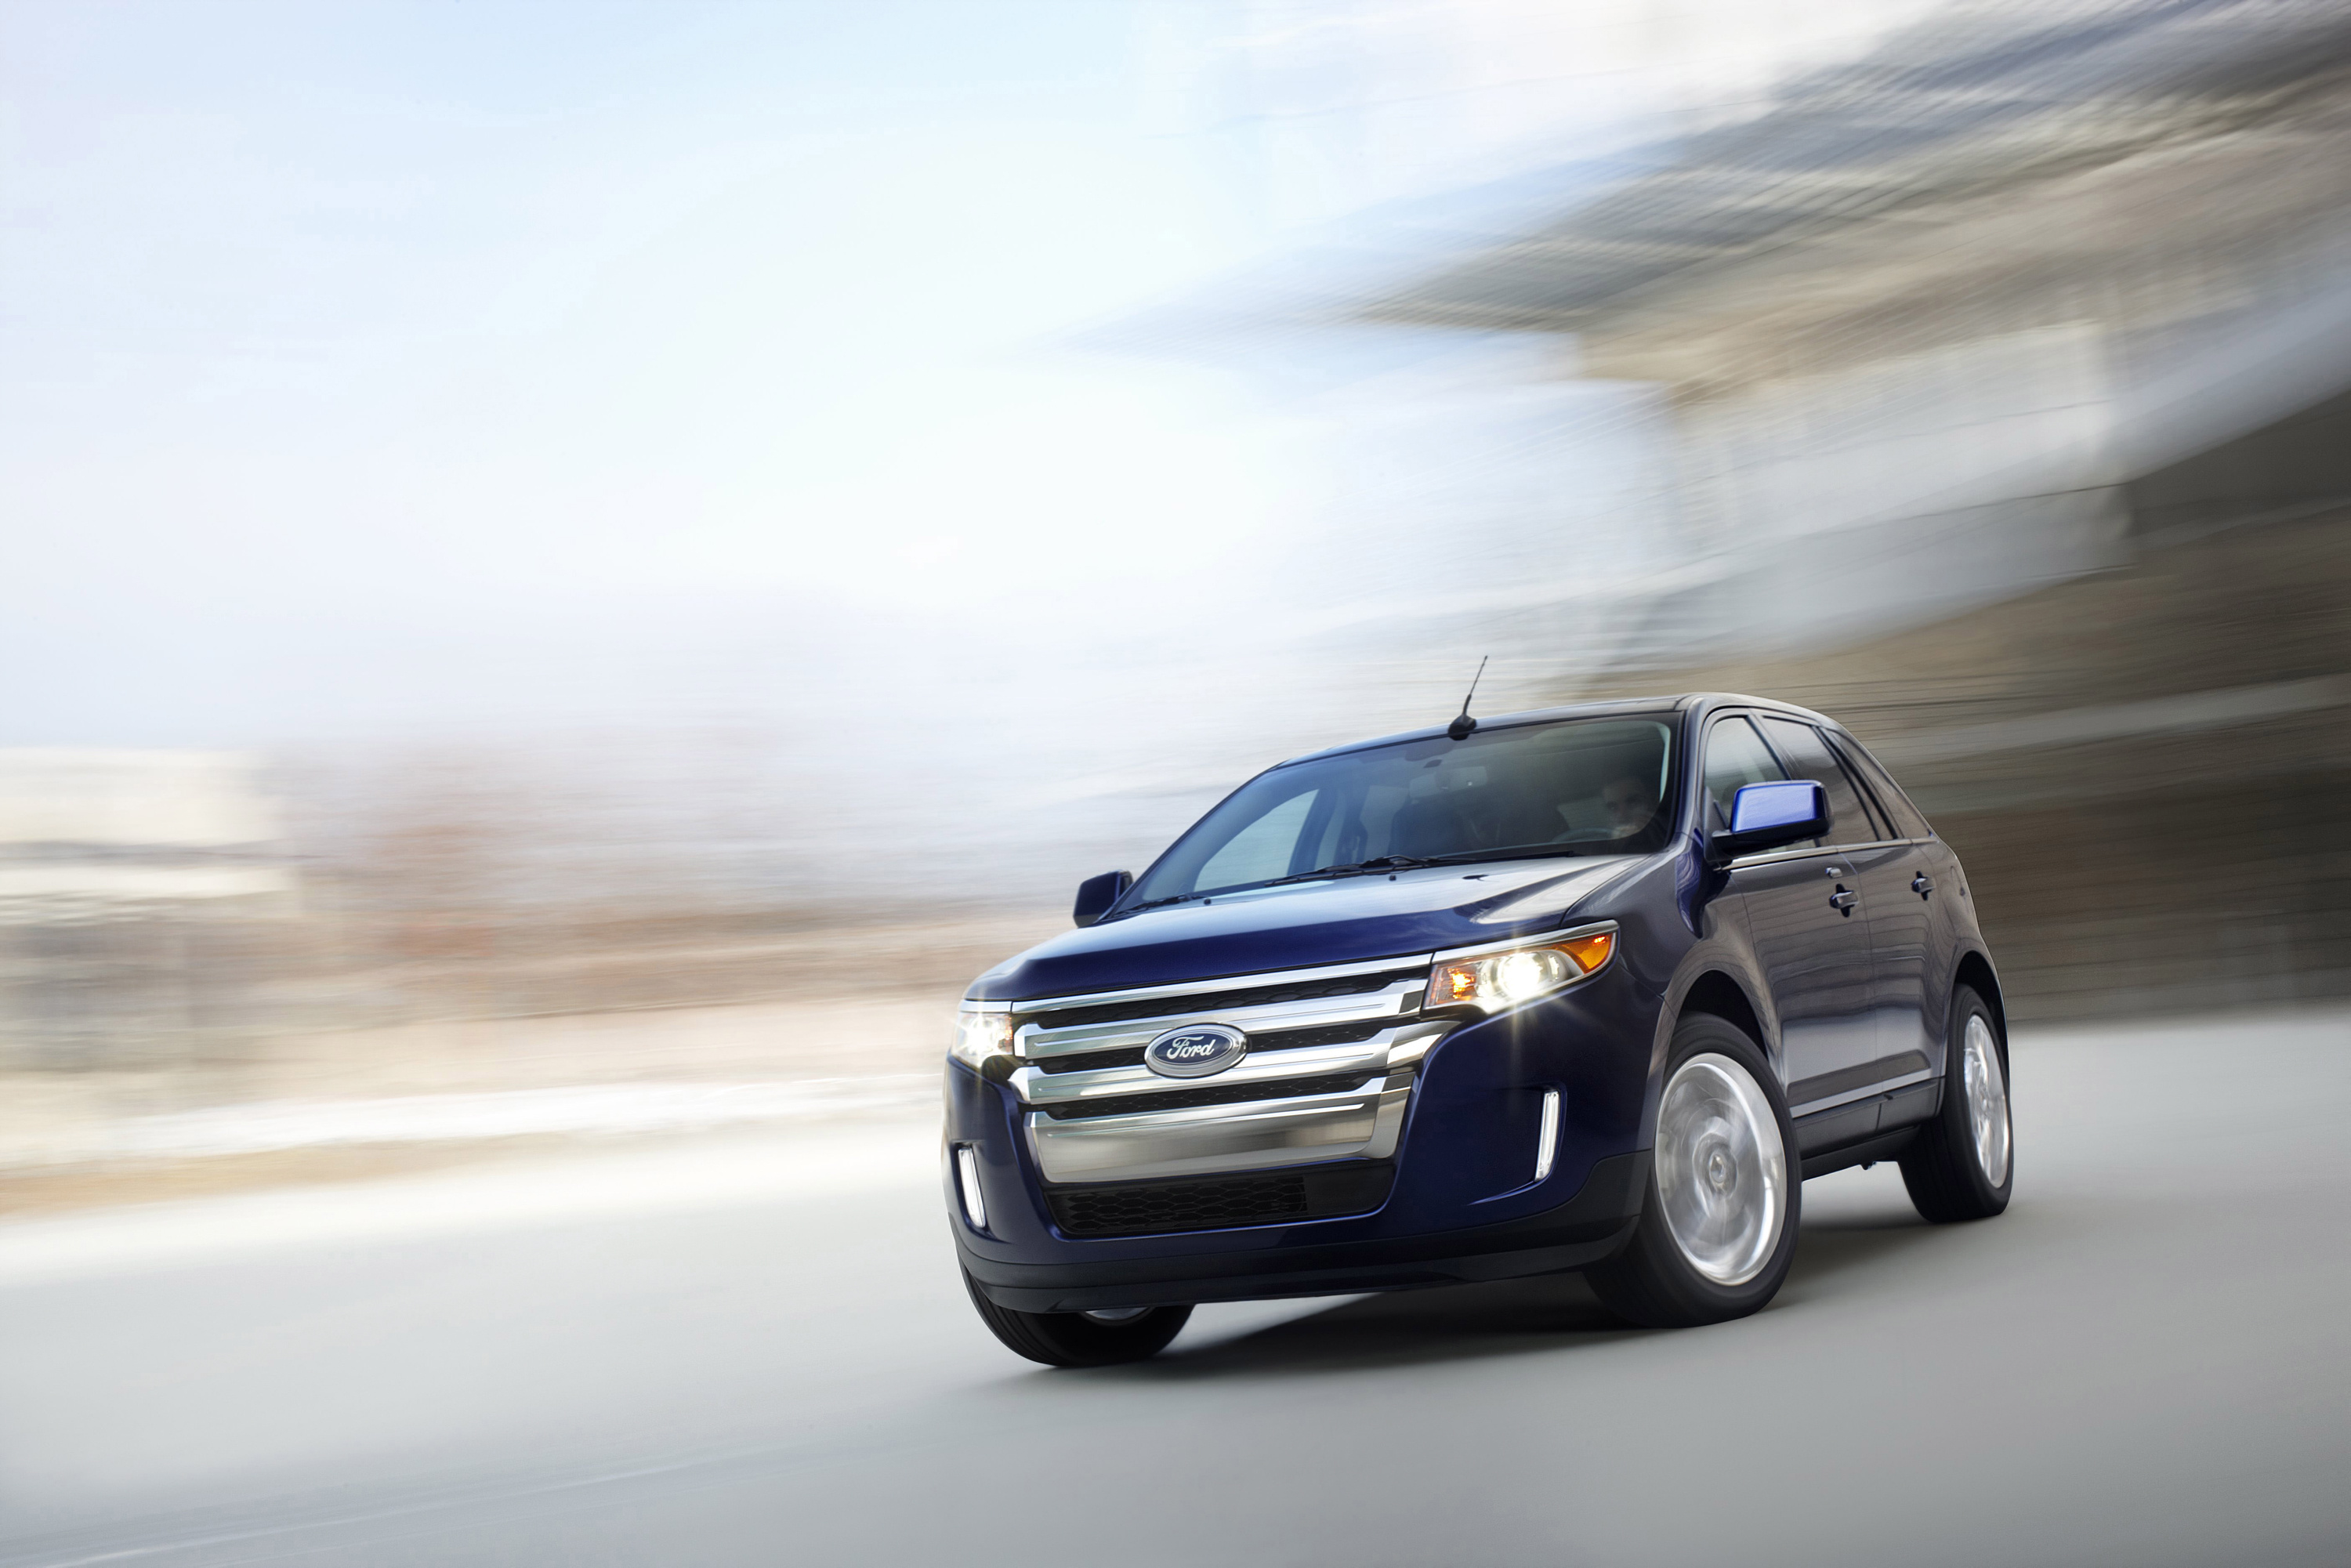 Ford Edge, 2013 model, Limited edition, Sporty compact SUV, 3000x2010 HD Desktop